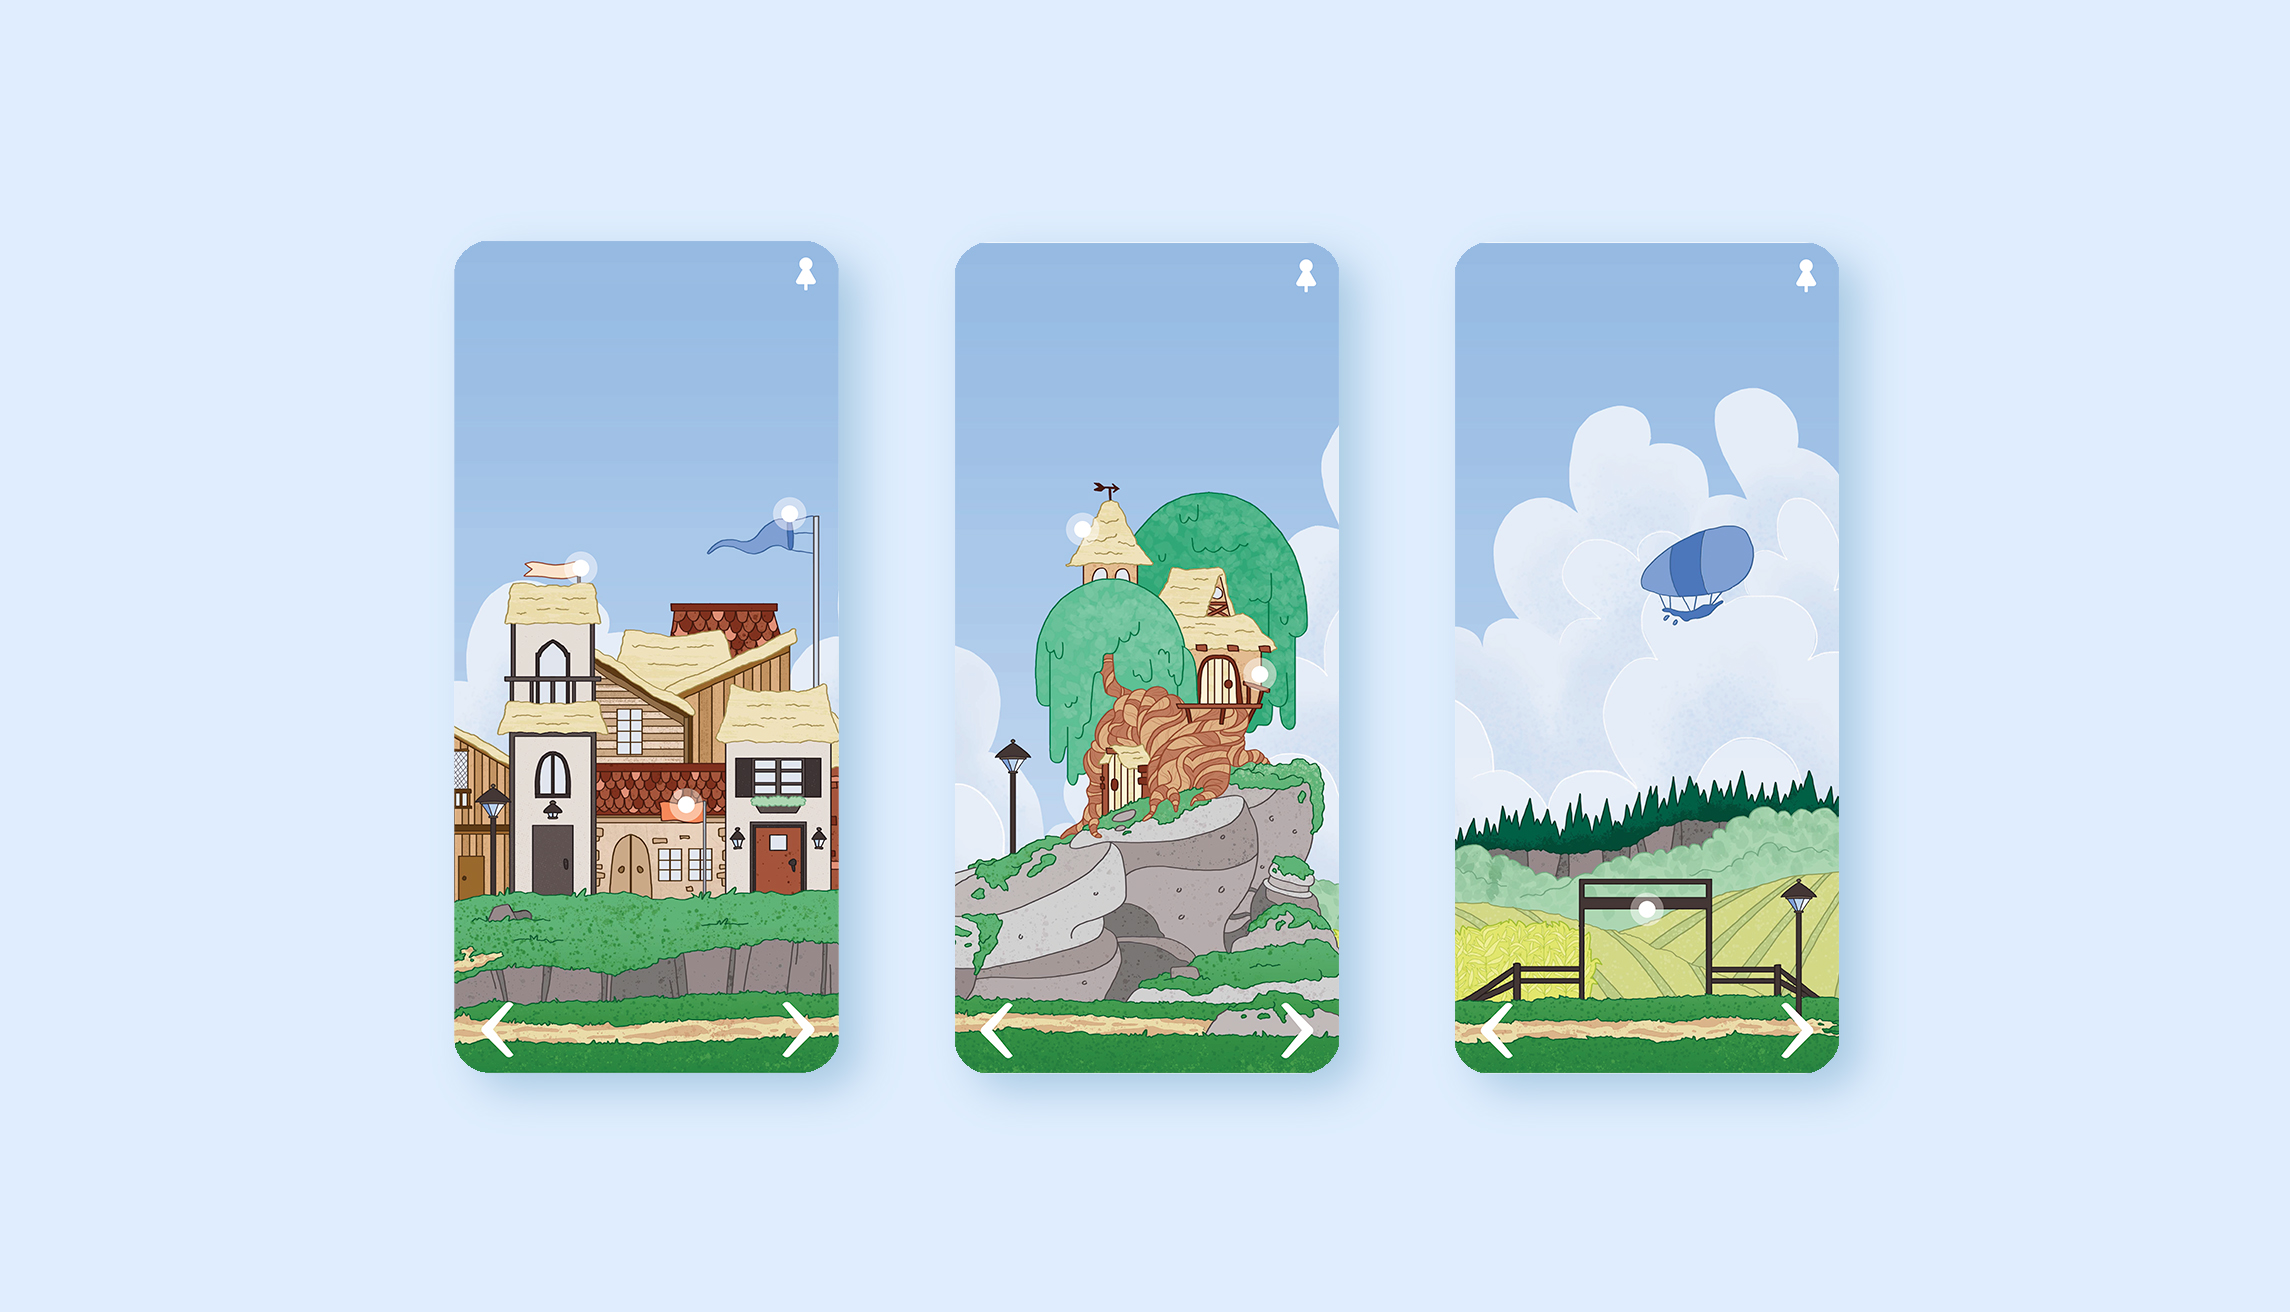 Cloud Town Home Screen – Town, Home and Farm (Left to right)